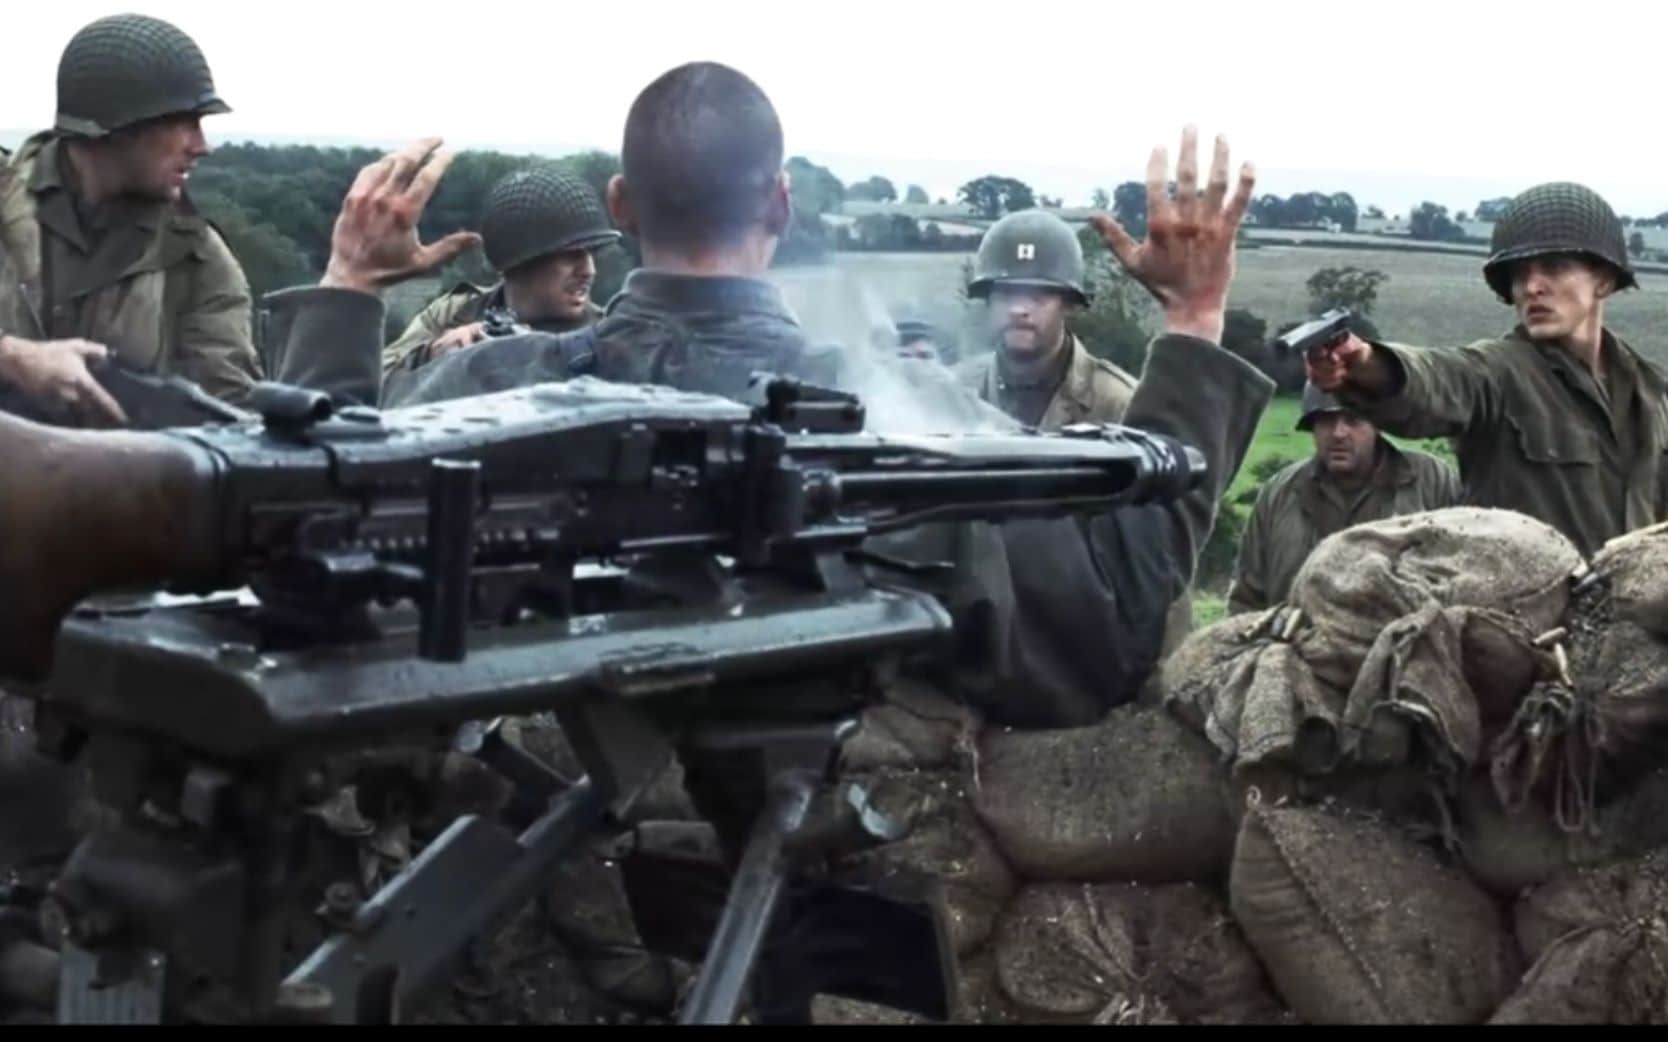 Still from the movie "Saving Private Ryan". In the foreground is MG.42